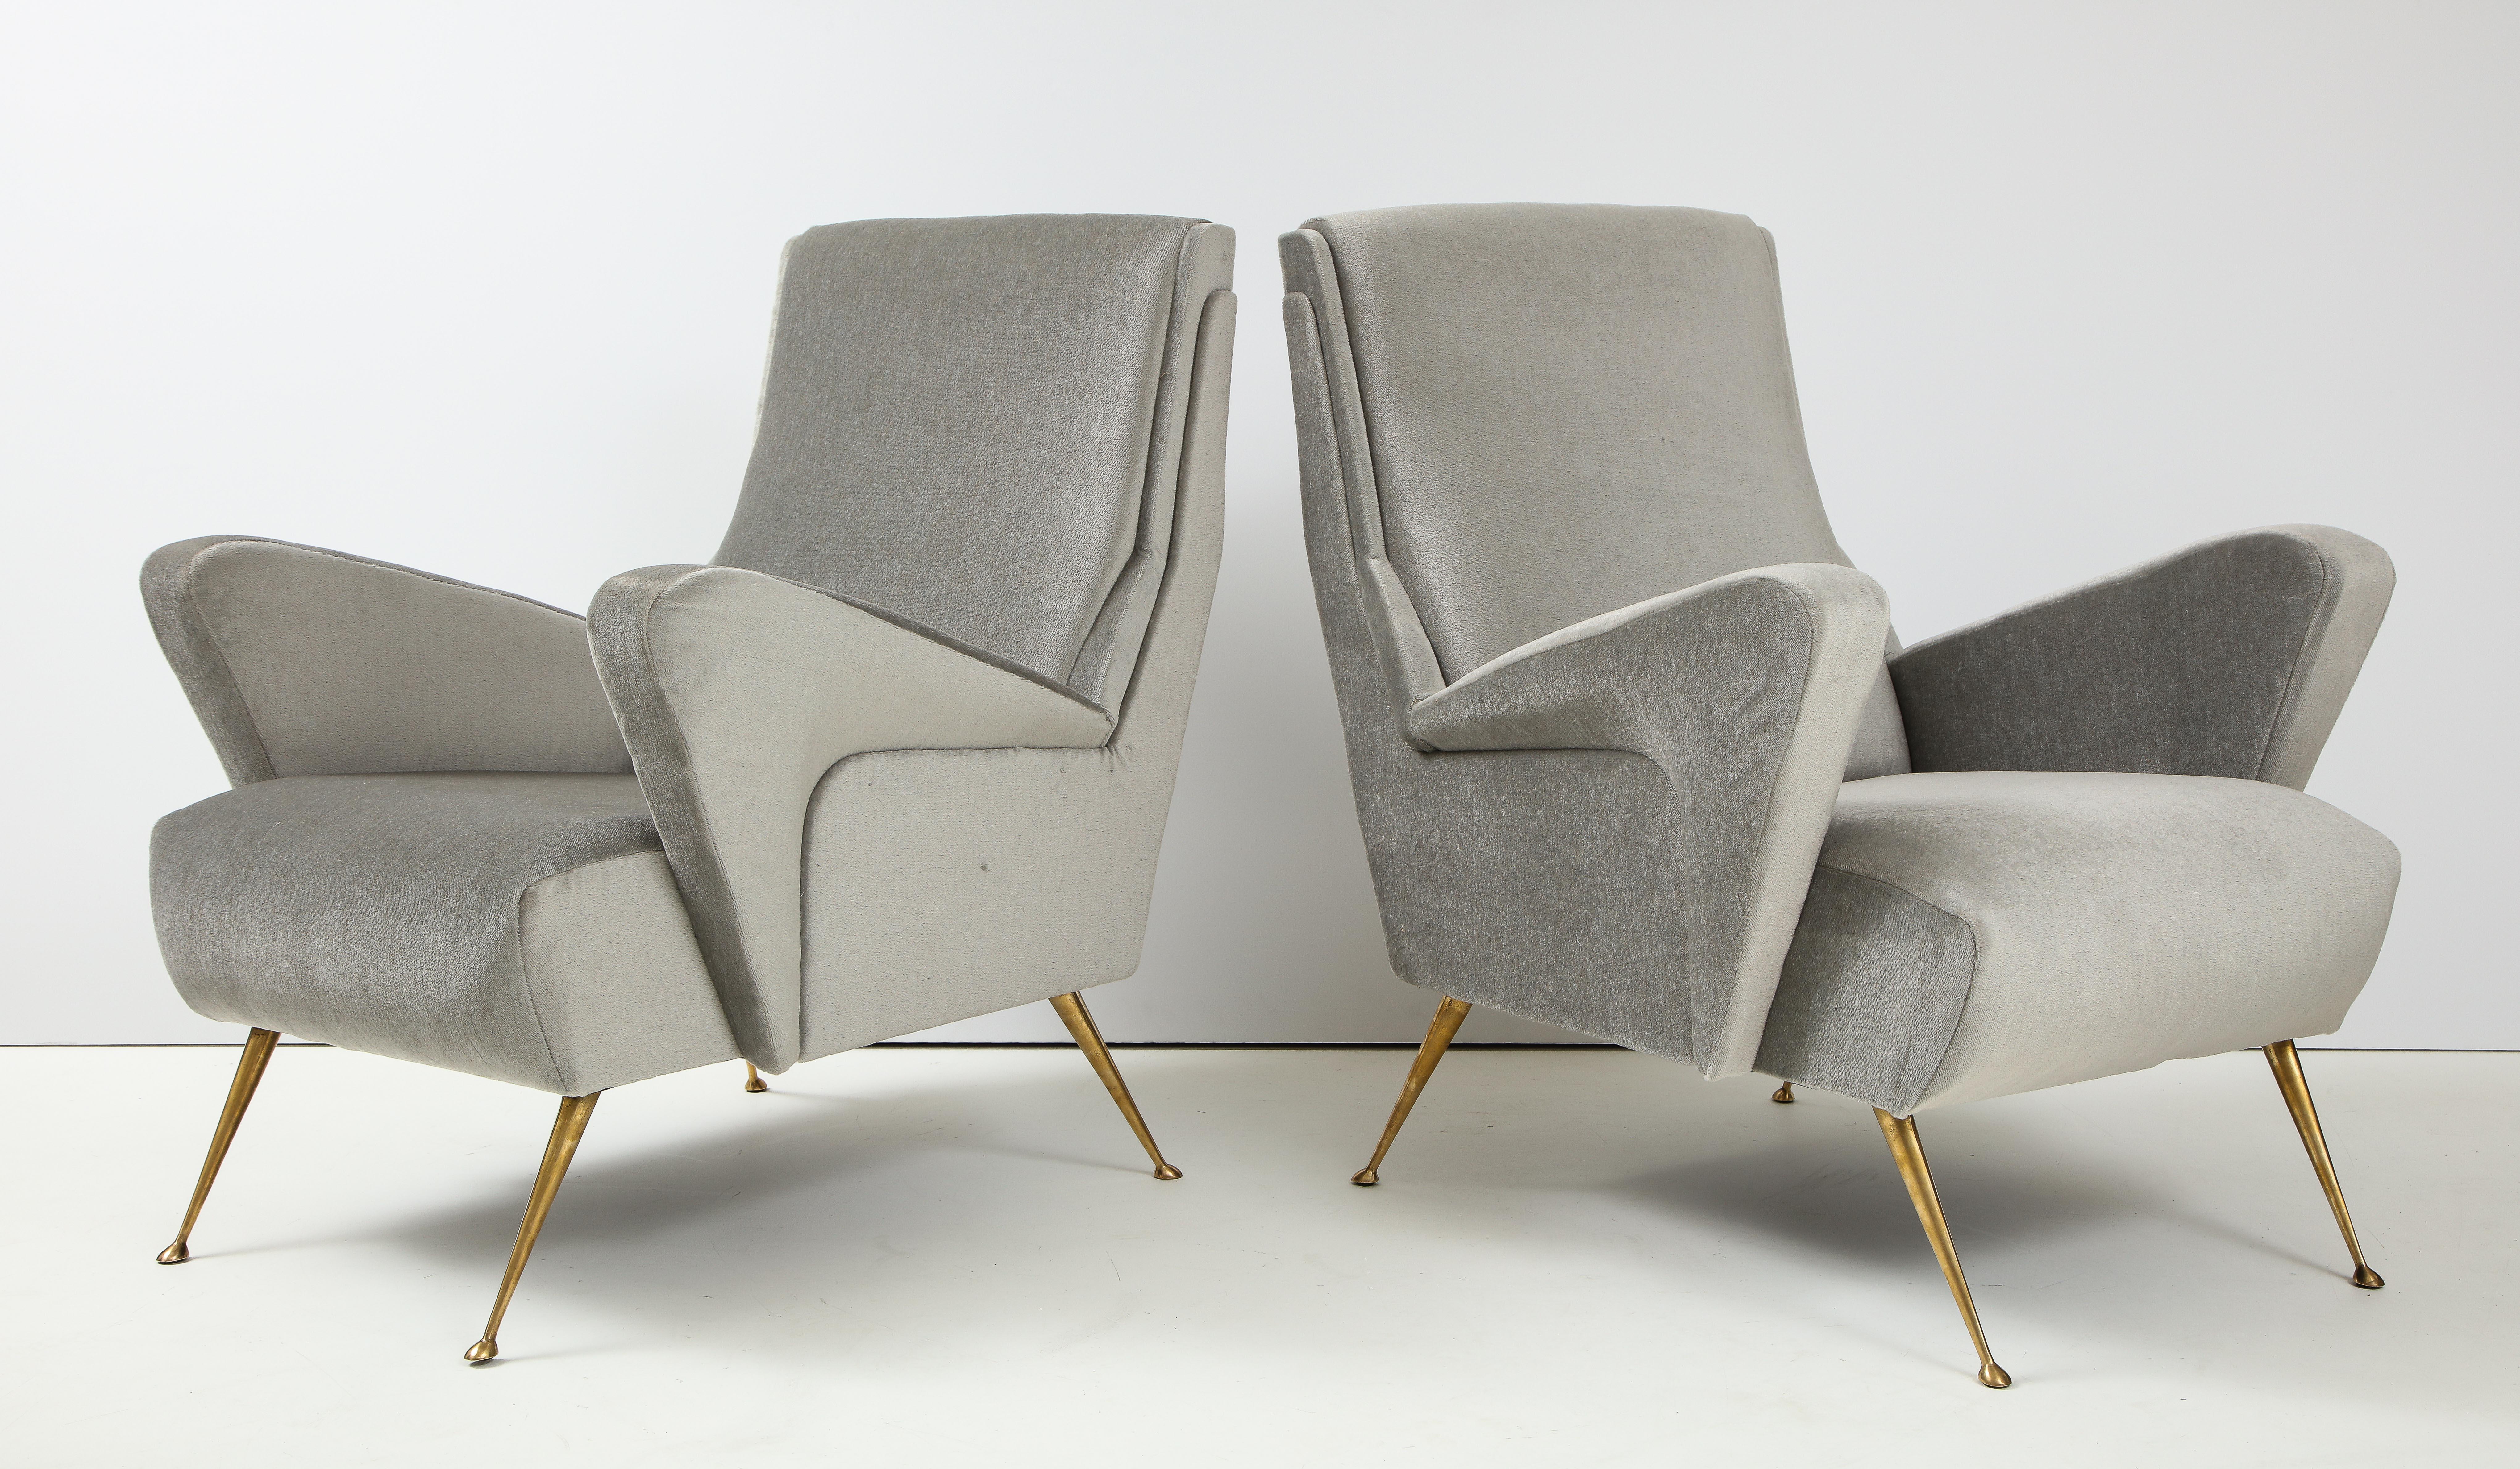 Mid-Century Modern 1950's Modernist Sculptural Italian Lounge Chairs with Solid Brass Legs